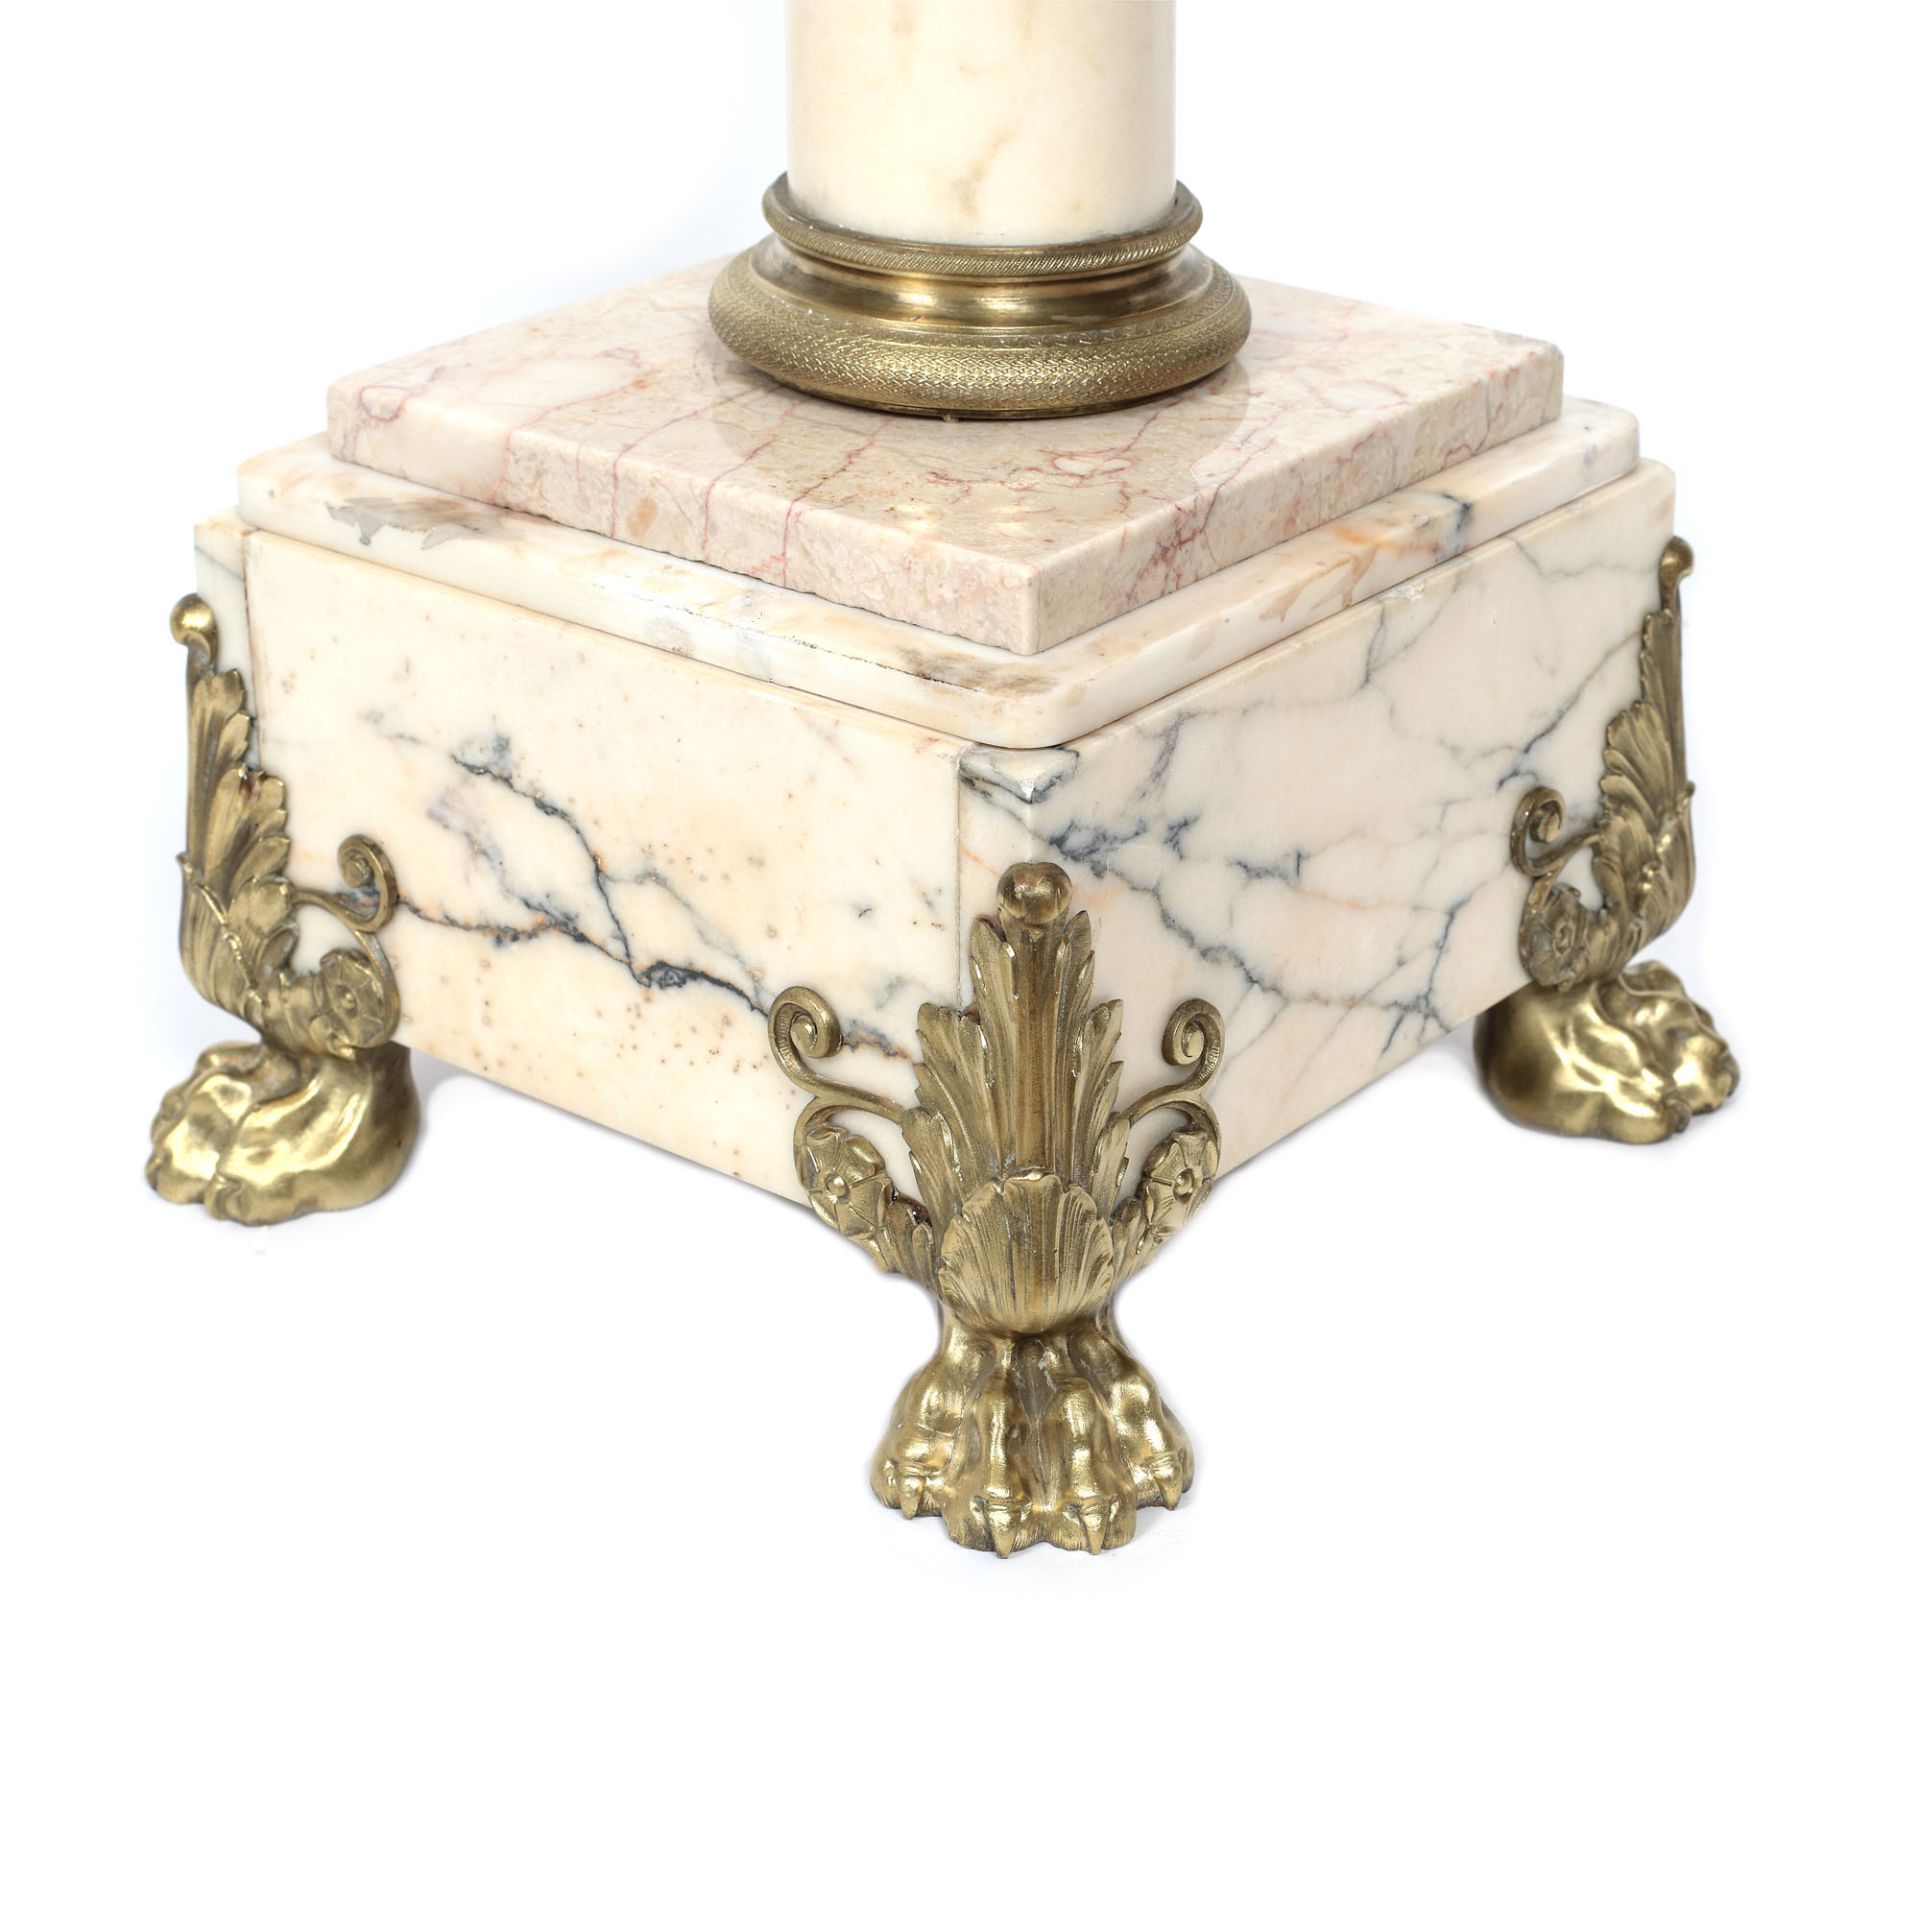 French workshop, Pedestal in white marble and doré bronze, late 19th century - Image 4 of 5